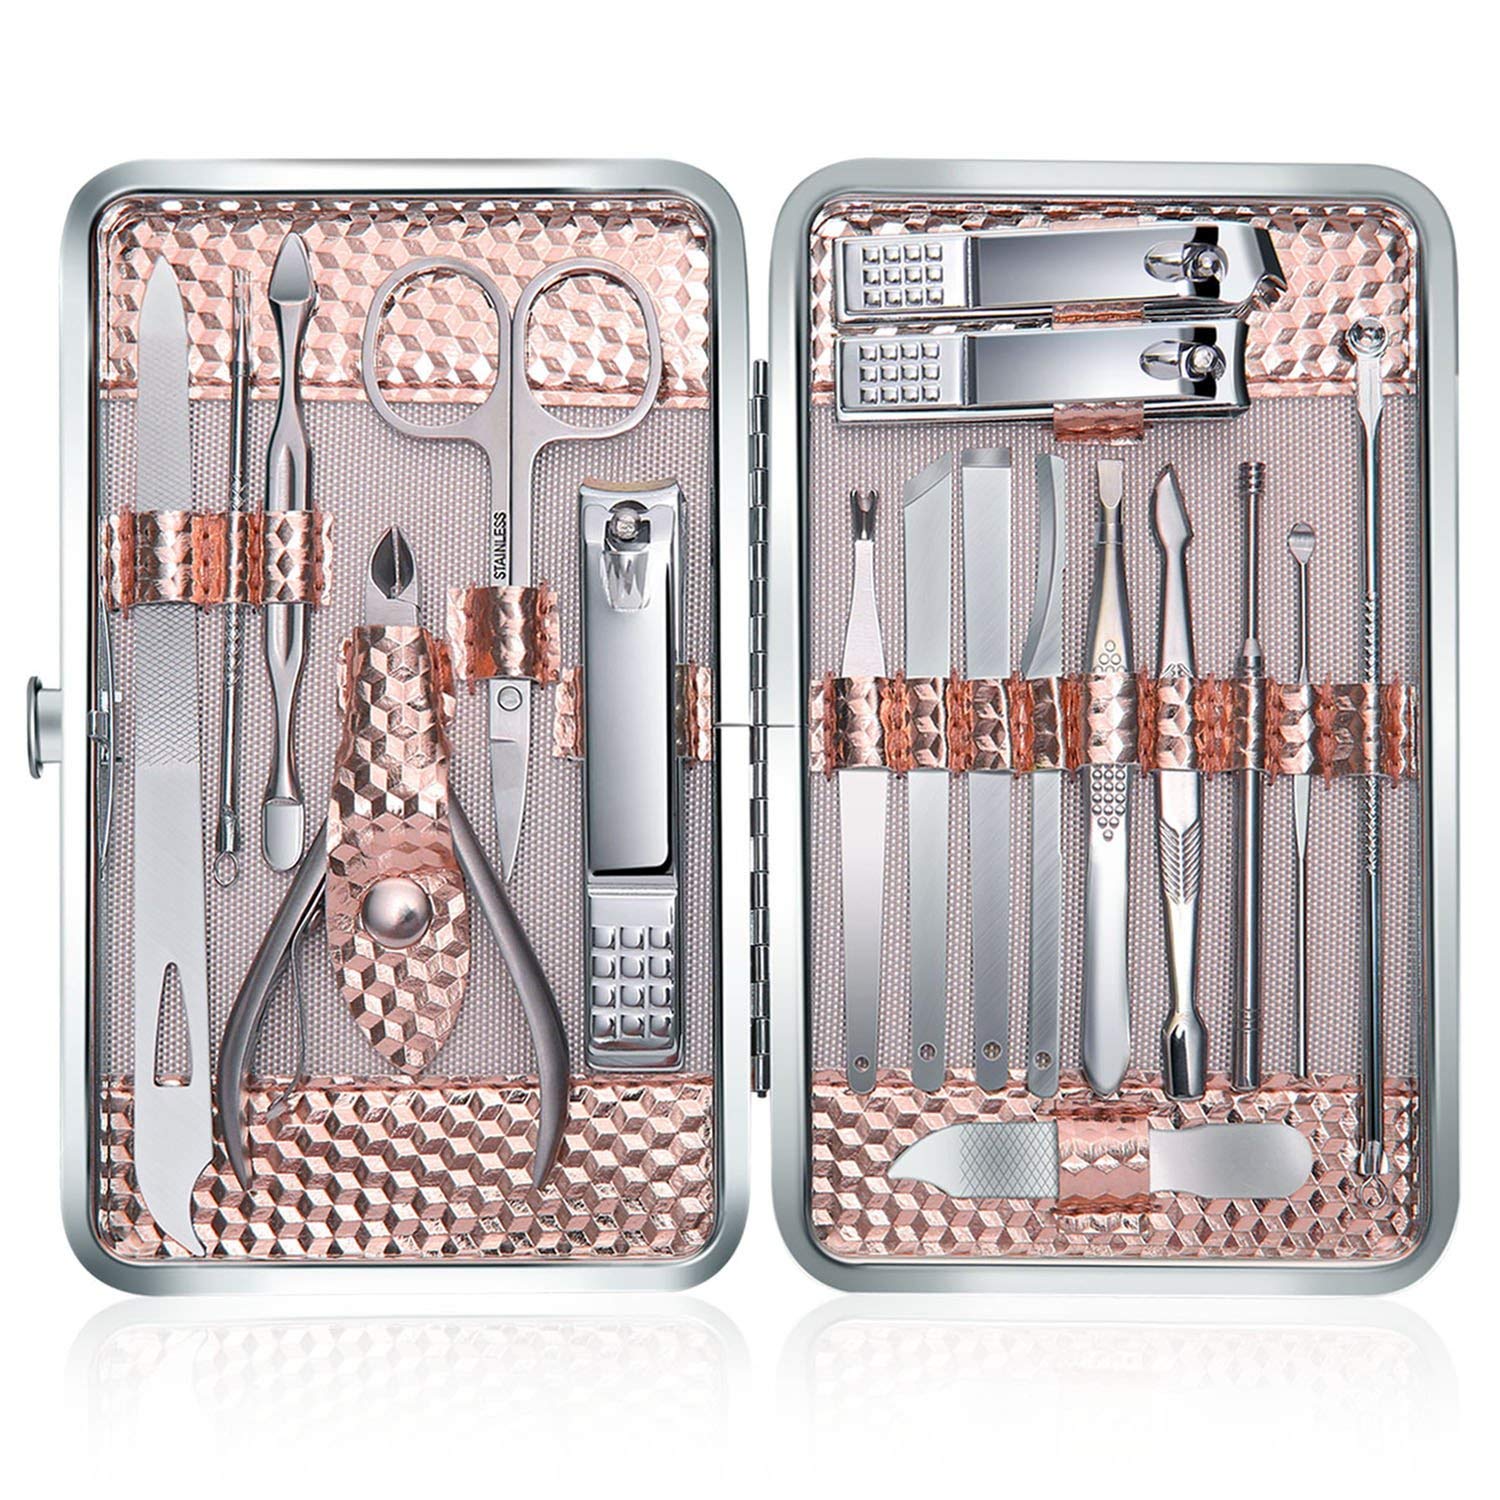 Keiby Citom Manicure Set 18pcs Professional Nail Clippers Kit Pedicure Care Tools-Stainless Steel Grooming Tools With Rose Gold PU Leather Case for Travel & Home (Rose Gold)